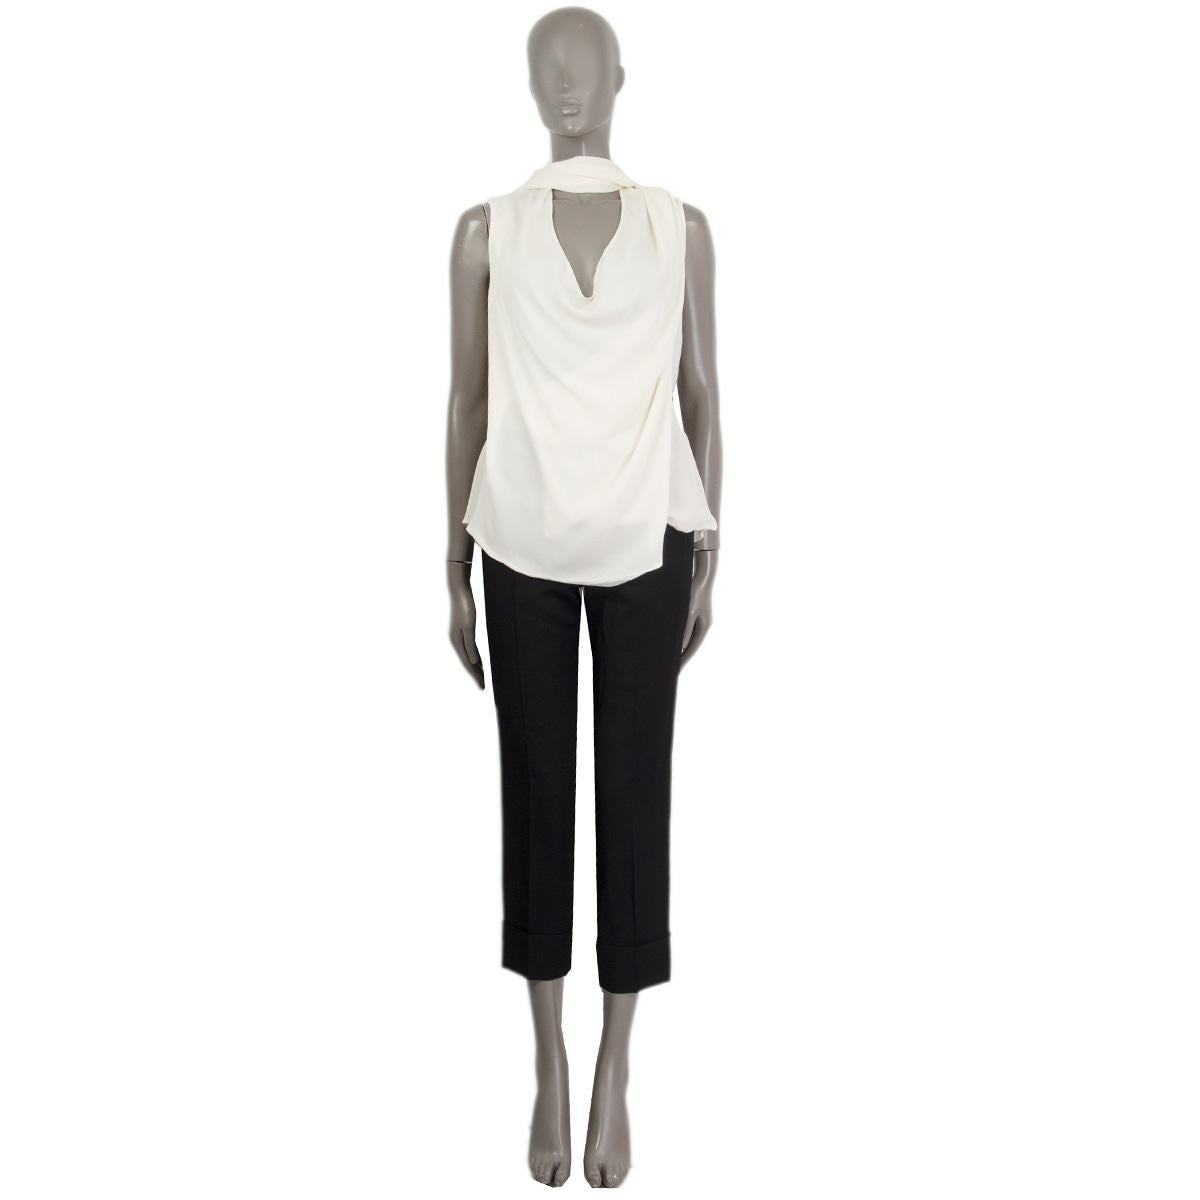 100% authentic Alexander McQueen draped sleeveless wrap blouse in off-white silk (100%). Comes with a attached scarf. Has been worn and is in excellent condition. 

Measurements
Tag Size	40
Size	S
Shoulder Width	36cm (14in)
Bust From	90cm